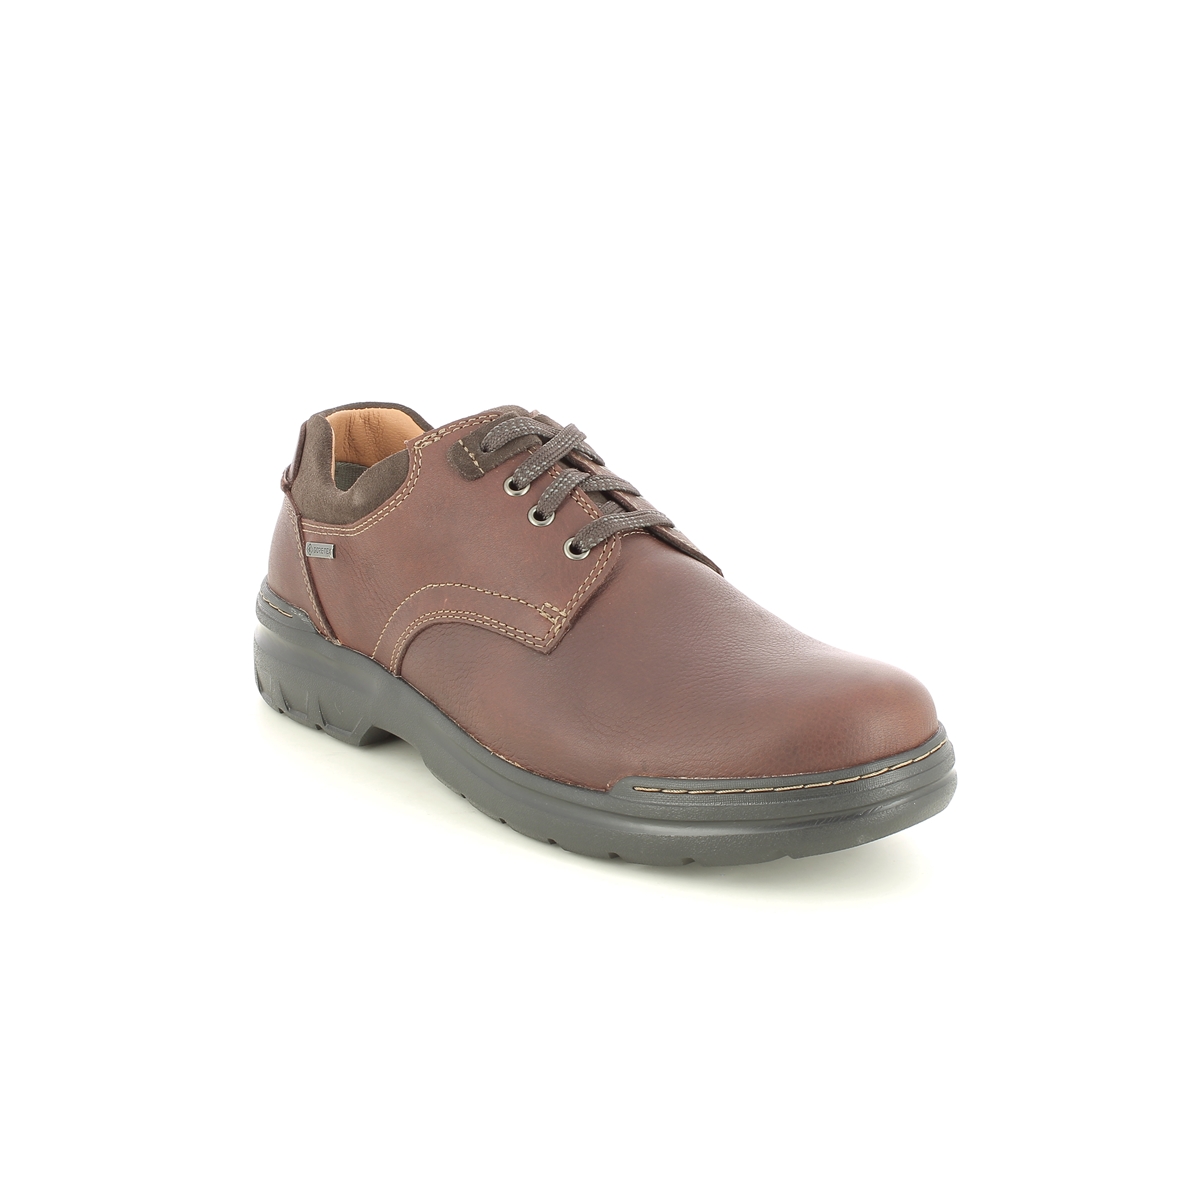 Clarks 2 Lo H Fit leather casual shoes